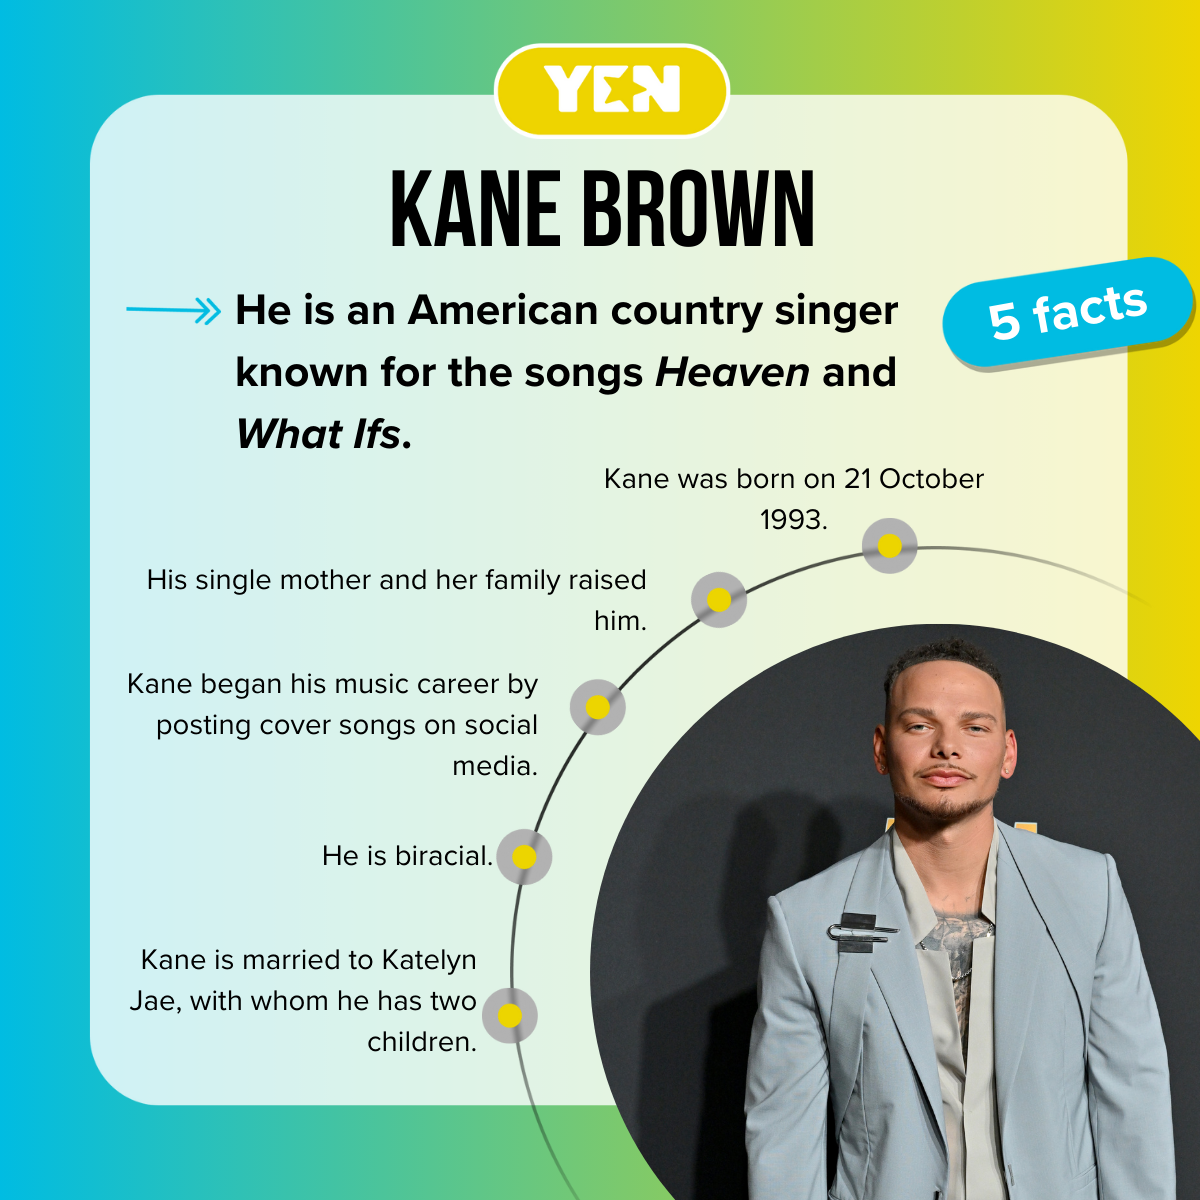 5 facts about Kane Brown